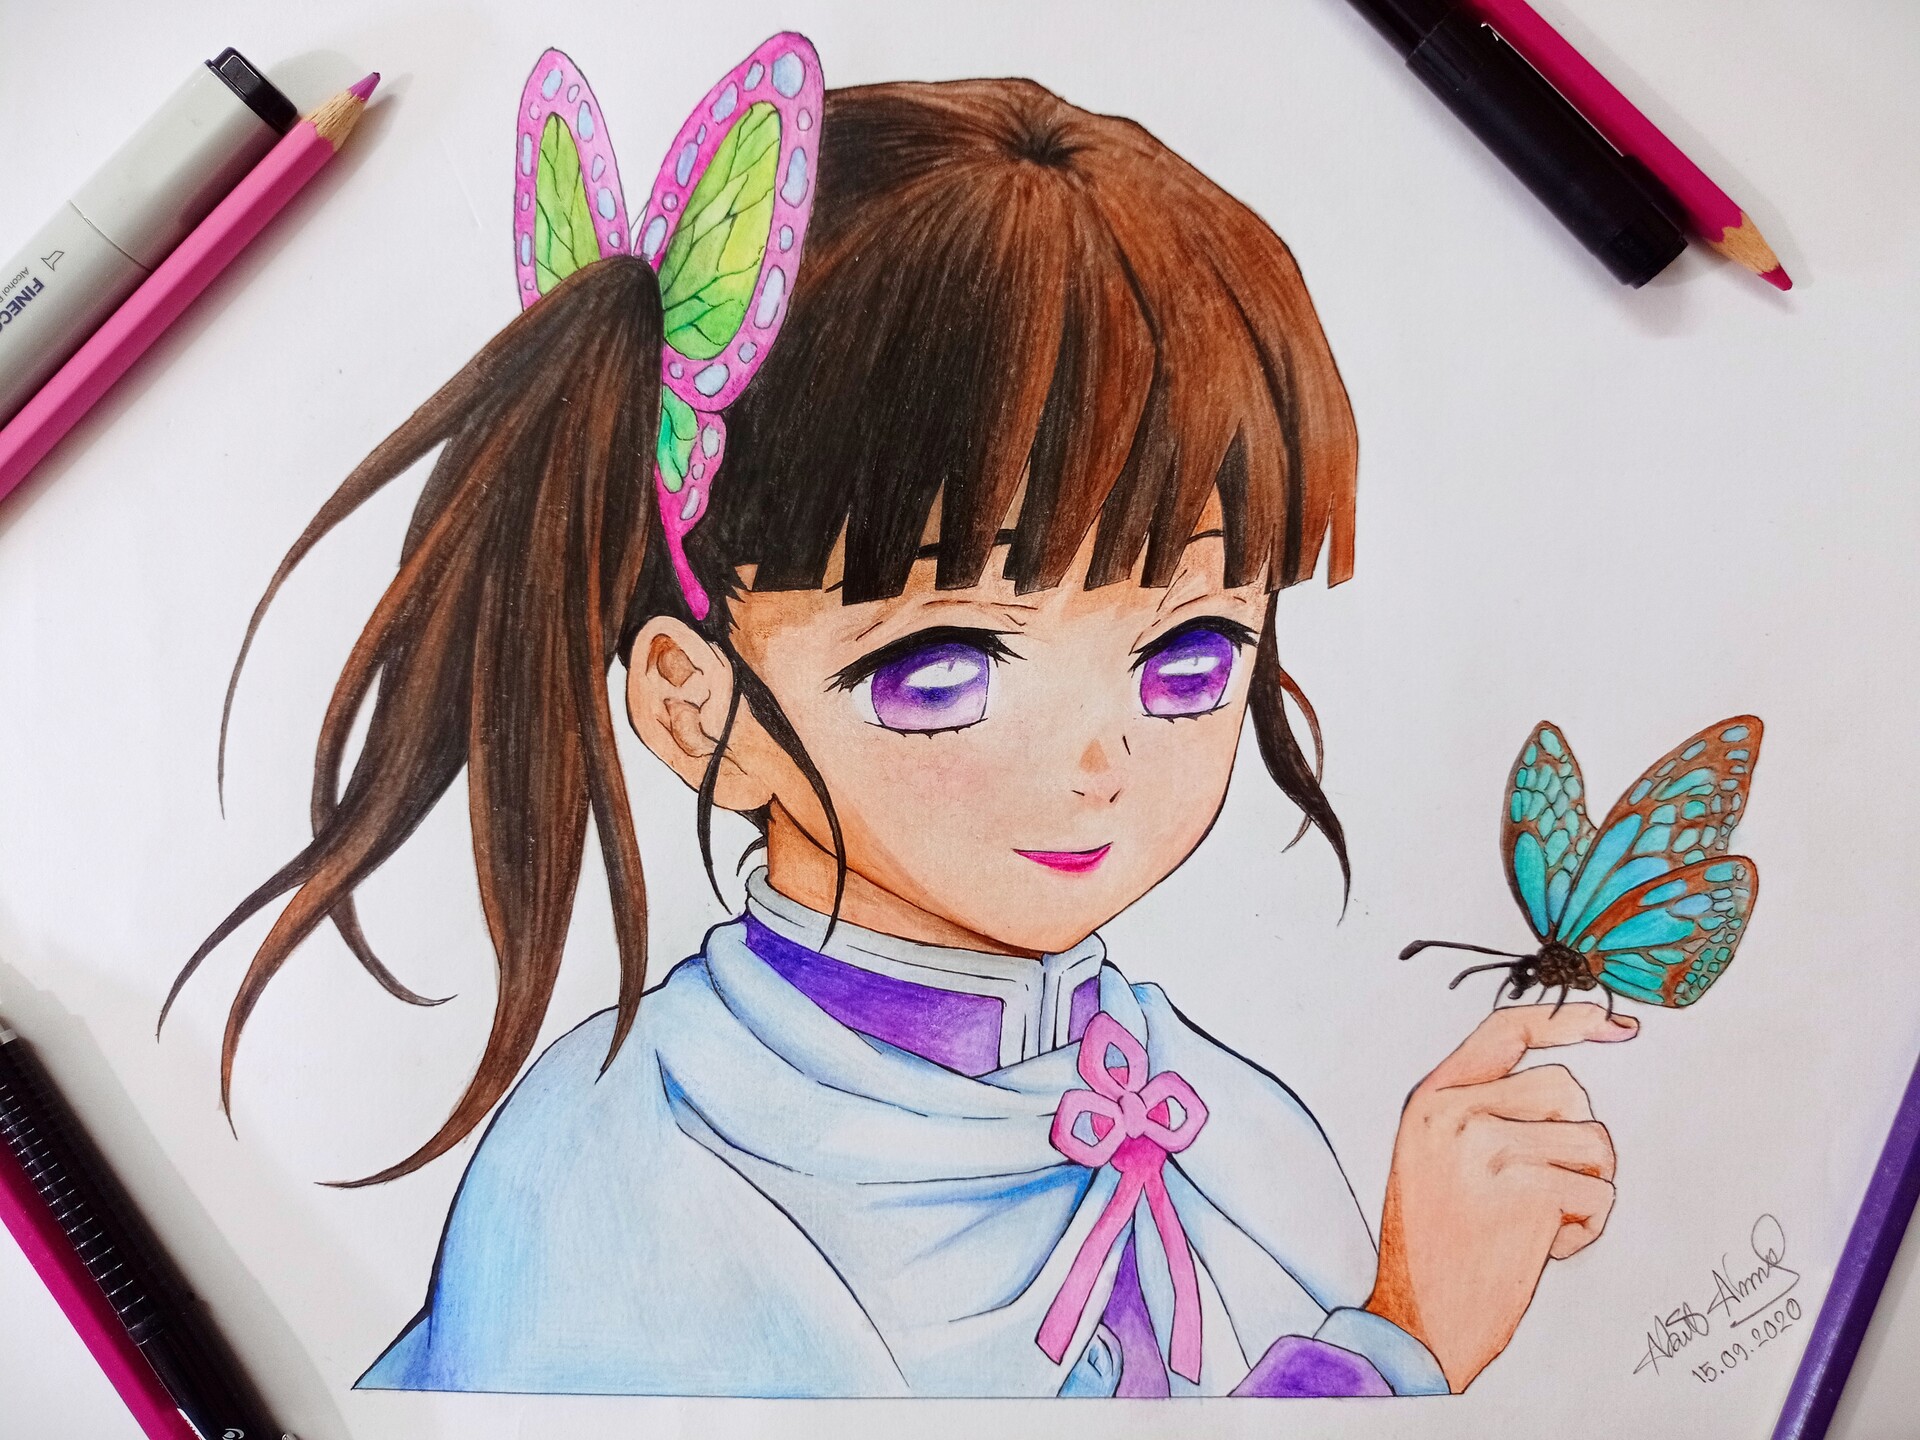 How to Draw Anime Boy Characters with Colored Pencils  Hiro Kushida Sketch   YouTube